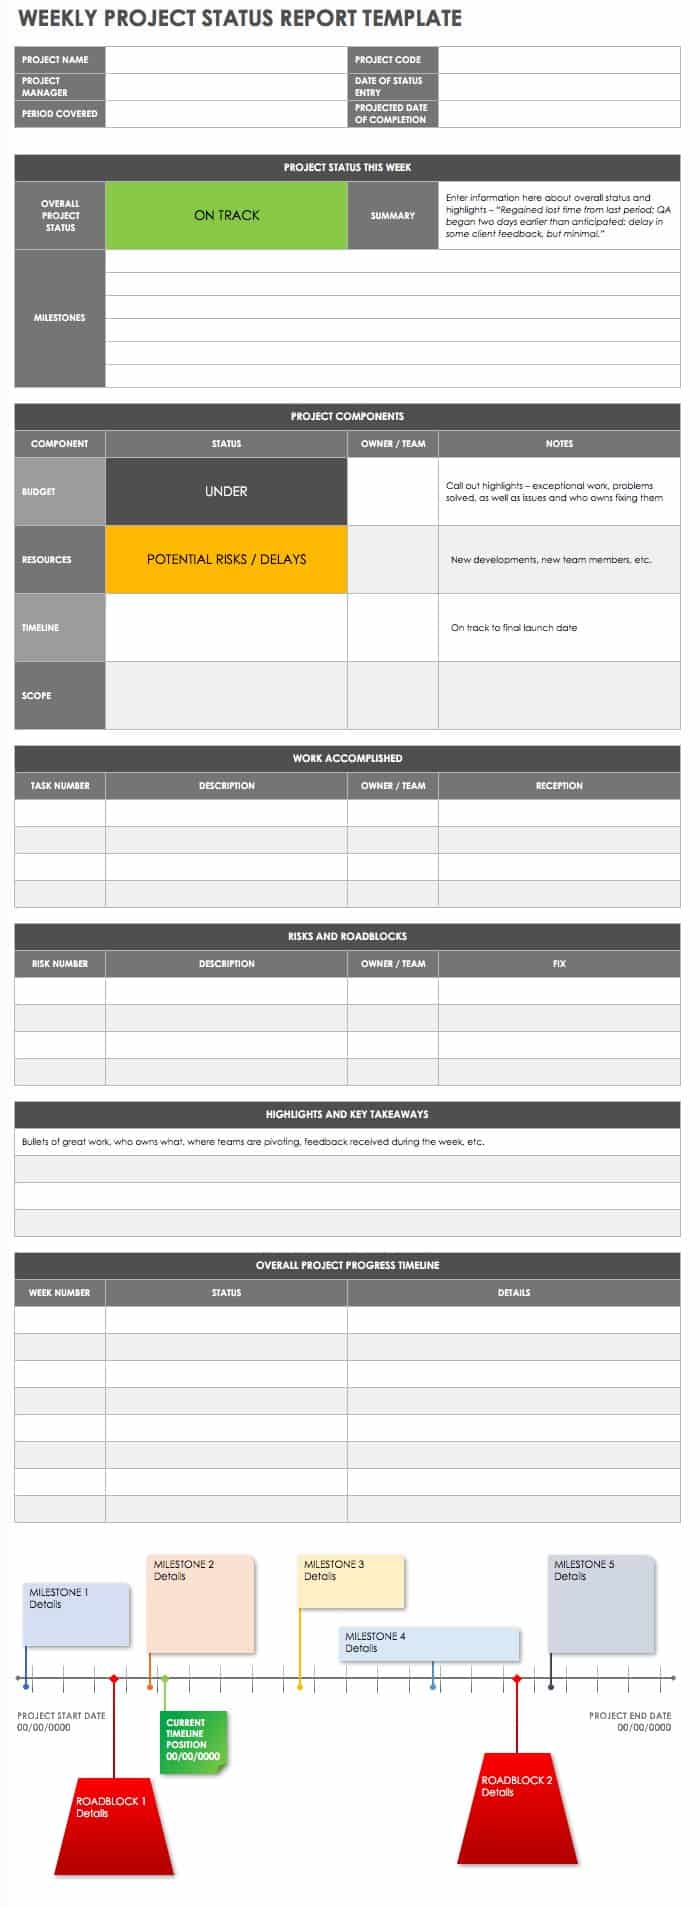 Project Financial Reporting Template from www.smartsheet.com